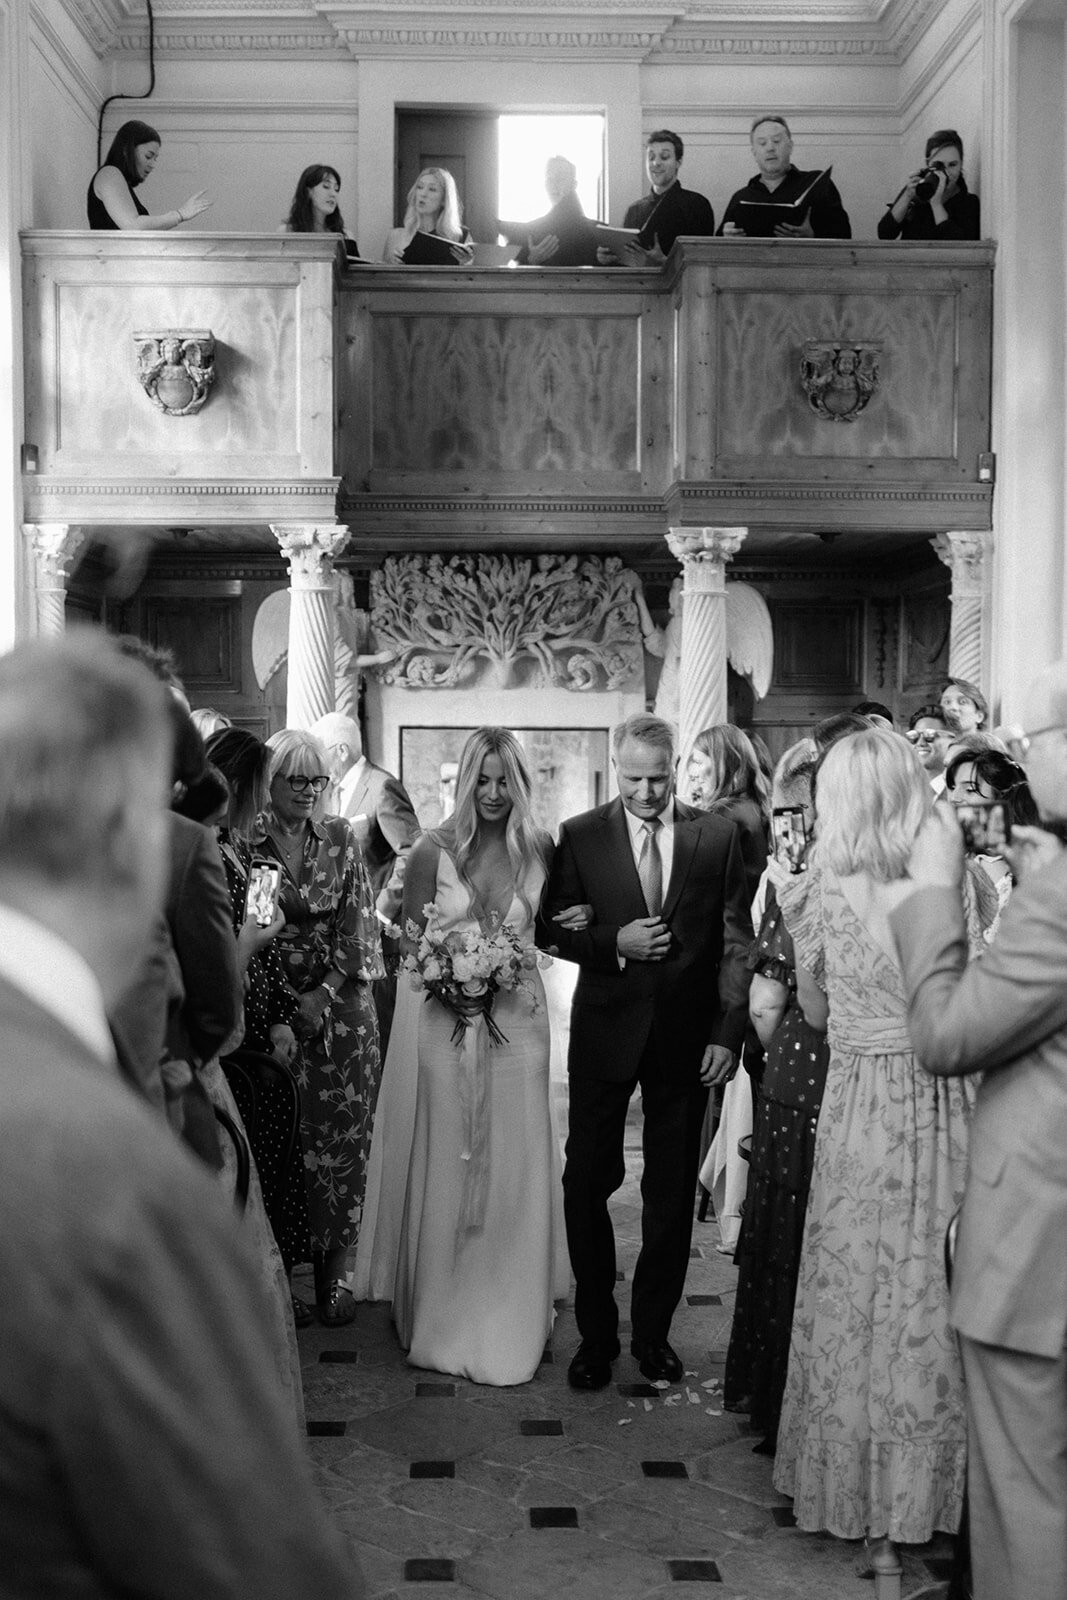 Attabara Studio UK Luxury Wedding Planners Private Estate Marquee Wedding with Rebecca Rees2 Attabara Studio UK Luxury Wedding Planners Private Estate Marquee Wedding with Rebecca Rees31